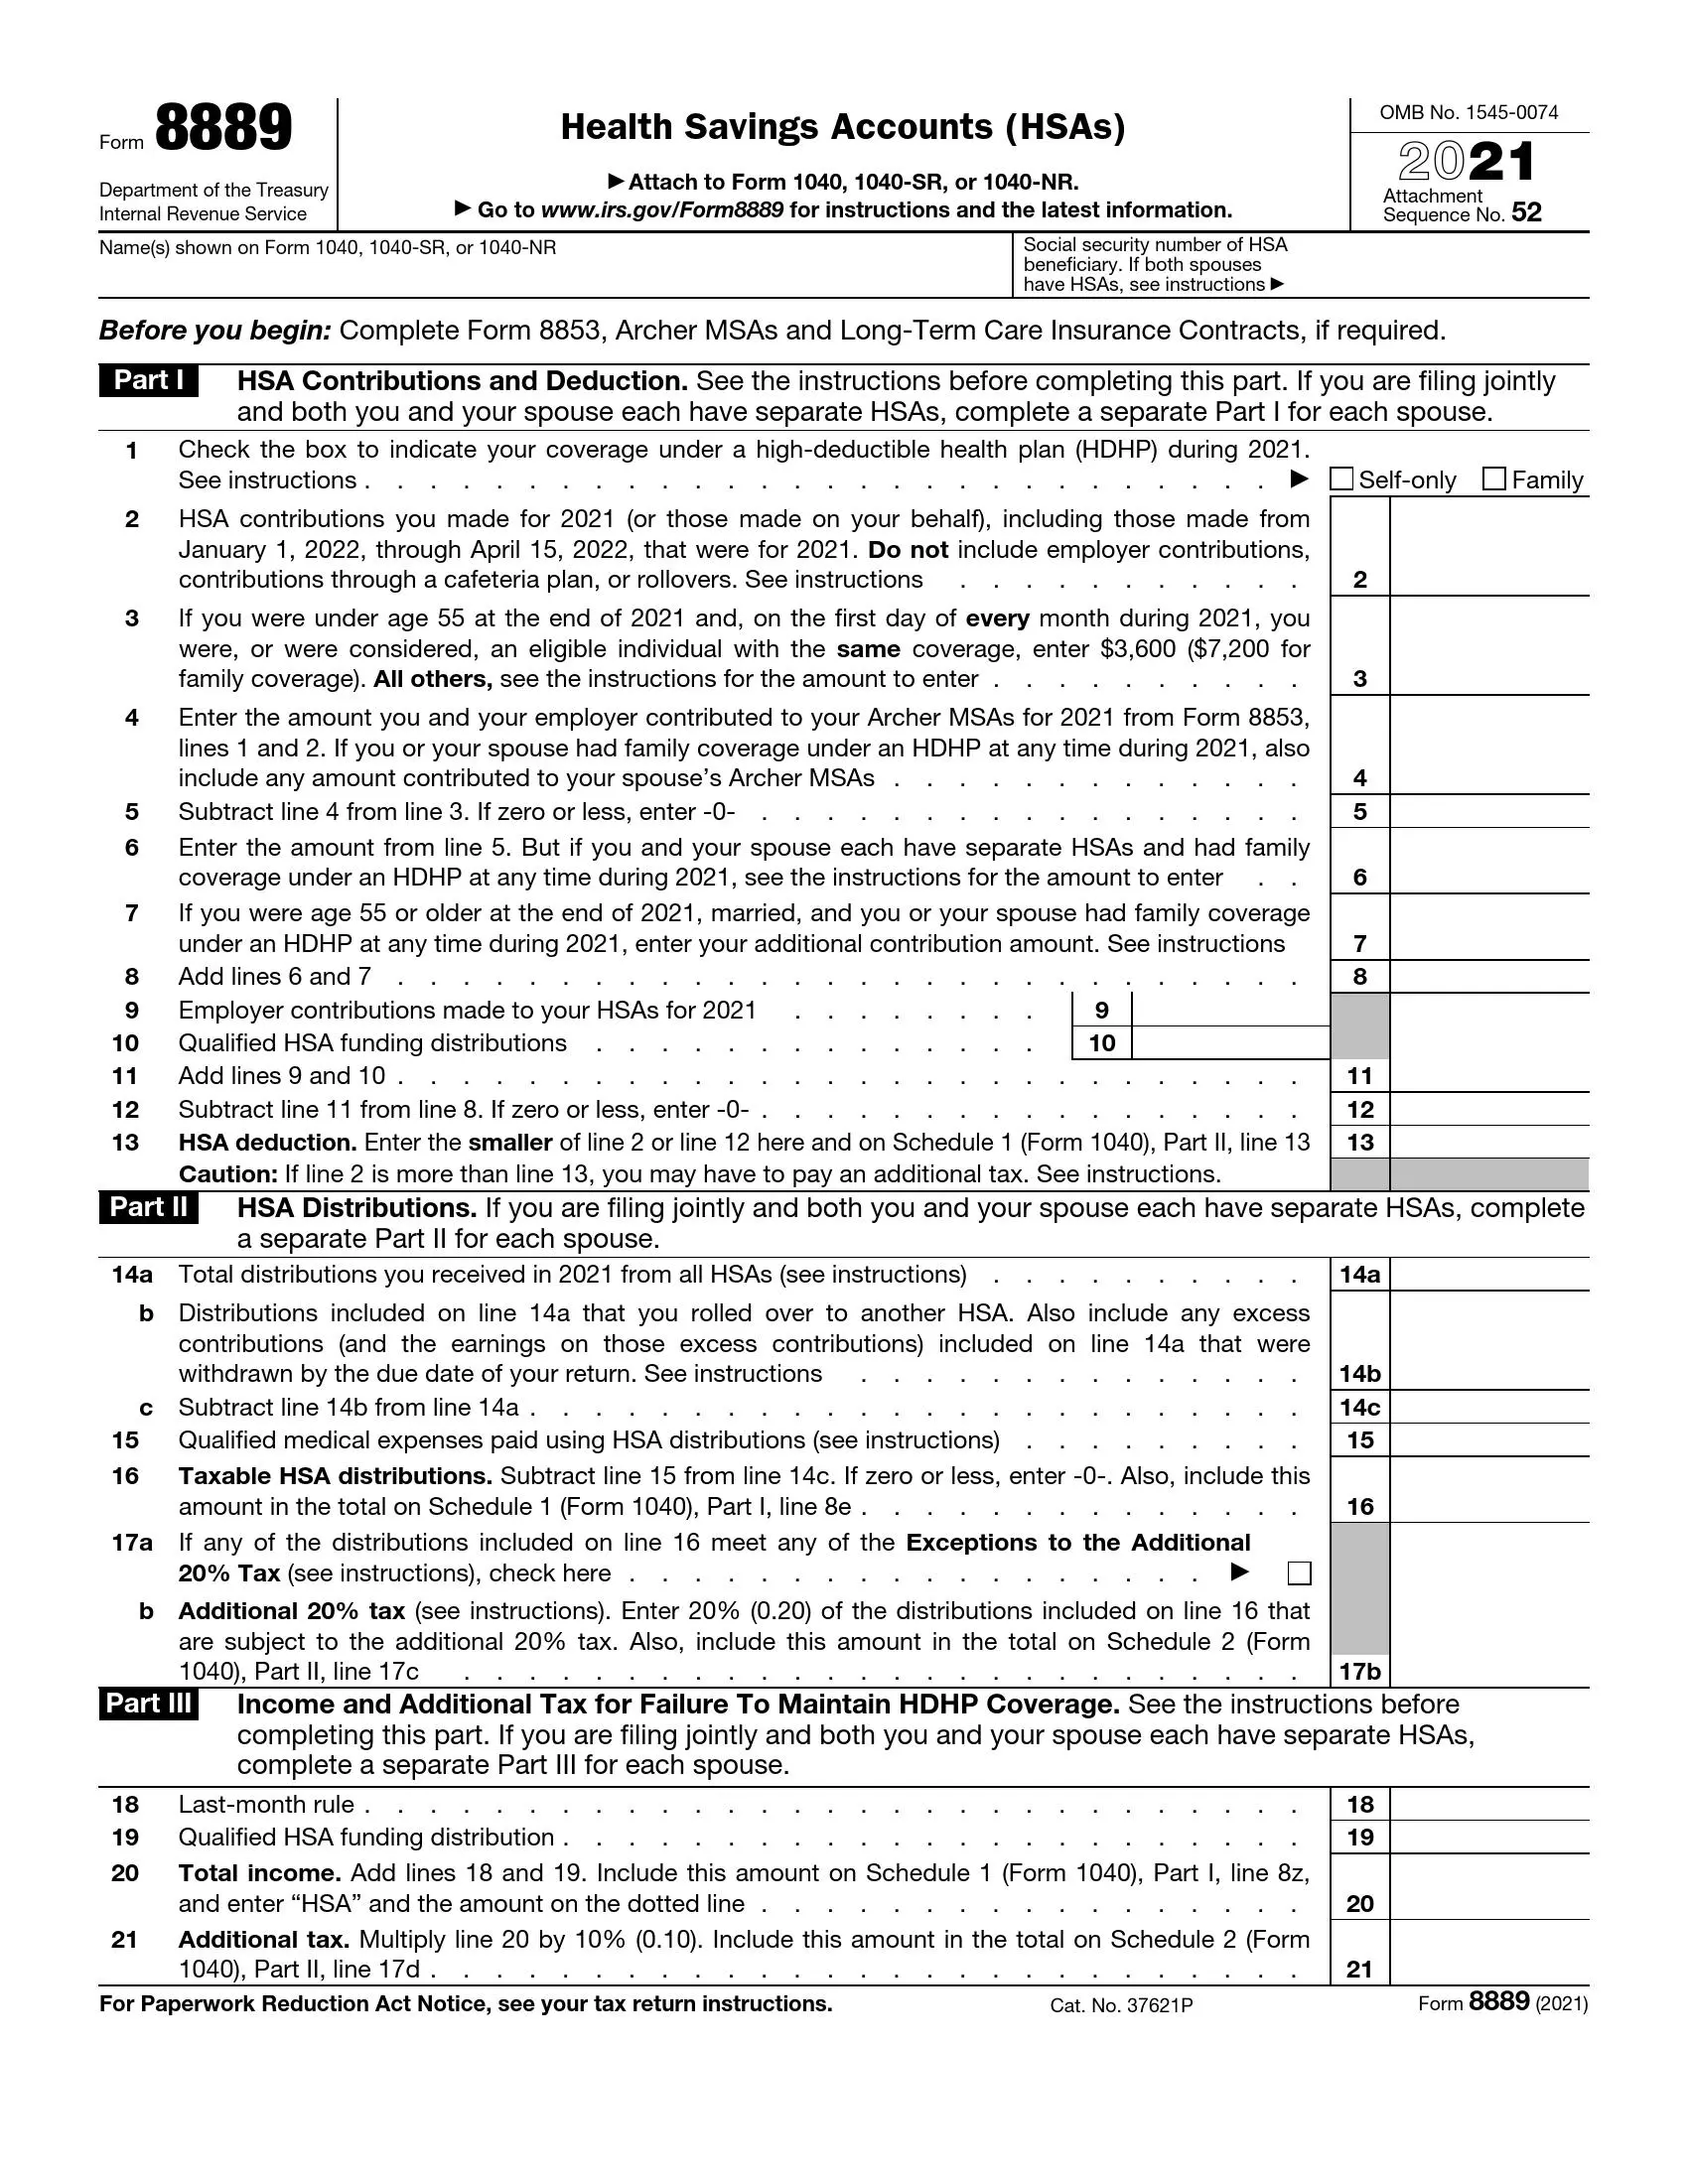 irs form 8889 2021 preview